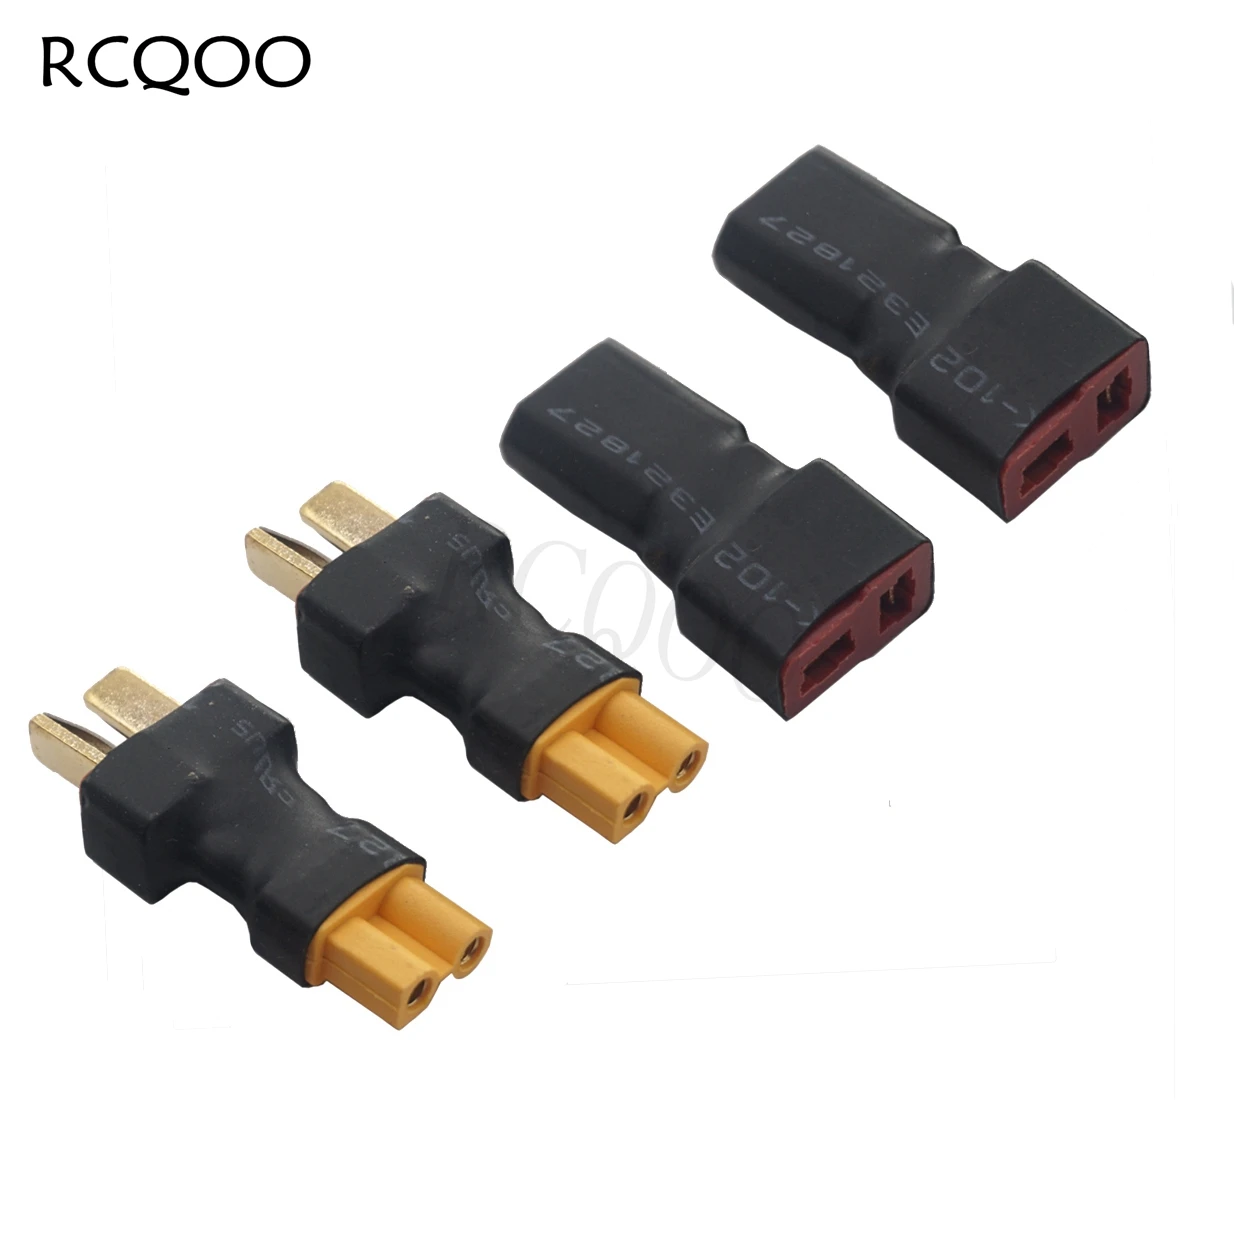 

2PairsNo Wires XT30 to Deans T Plug Style Female Male Adapter Connector for RC FPV Drone Car Lipo NiMH Battery Charger ESC